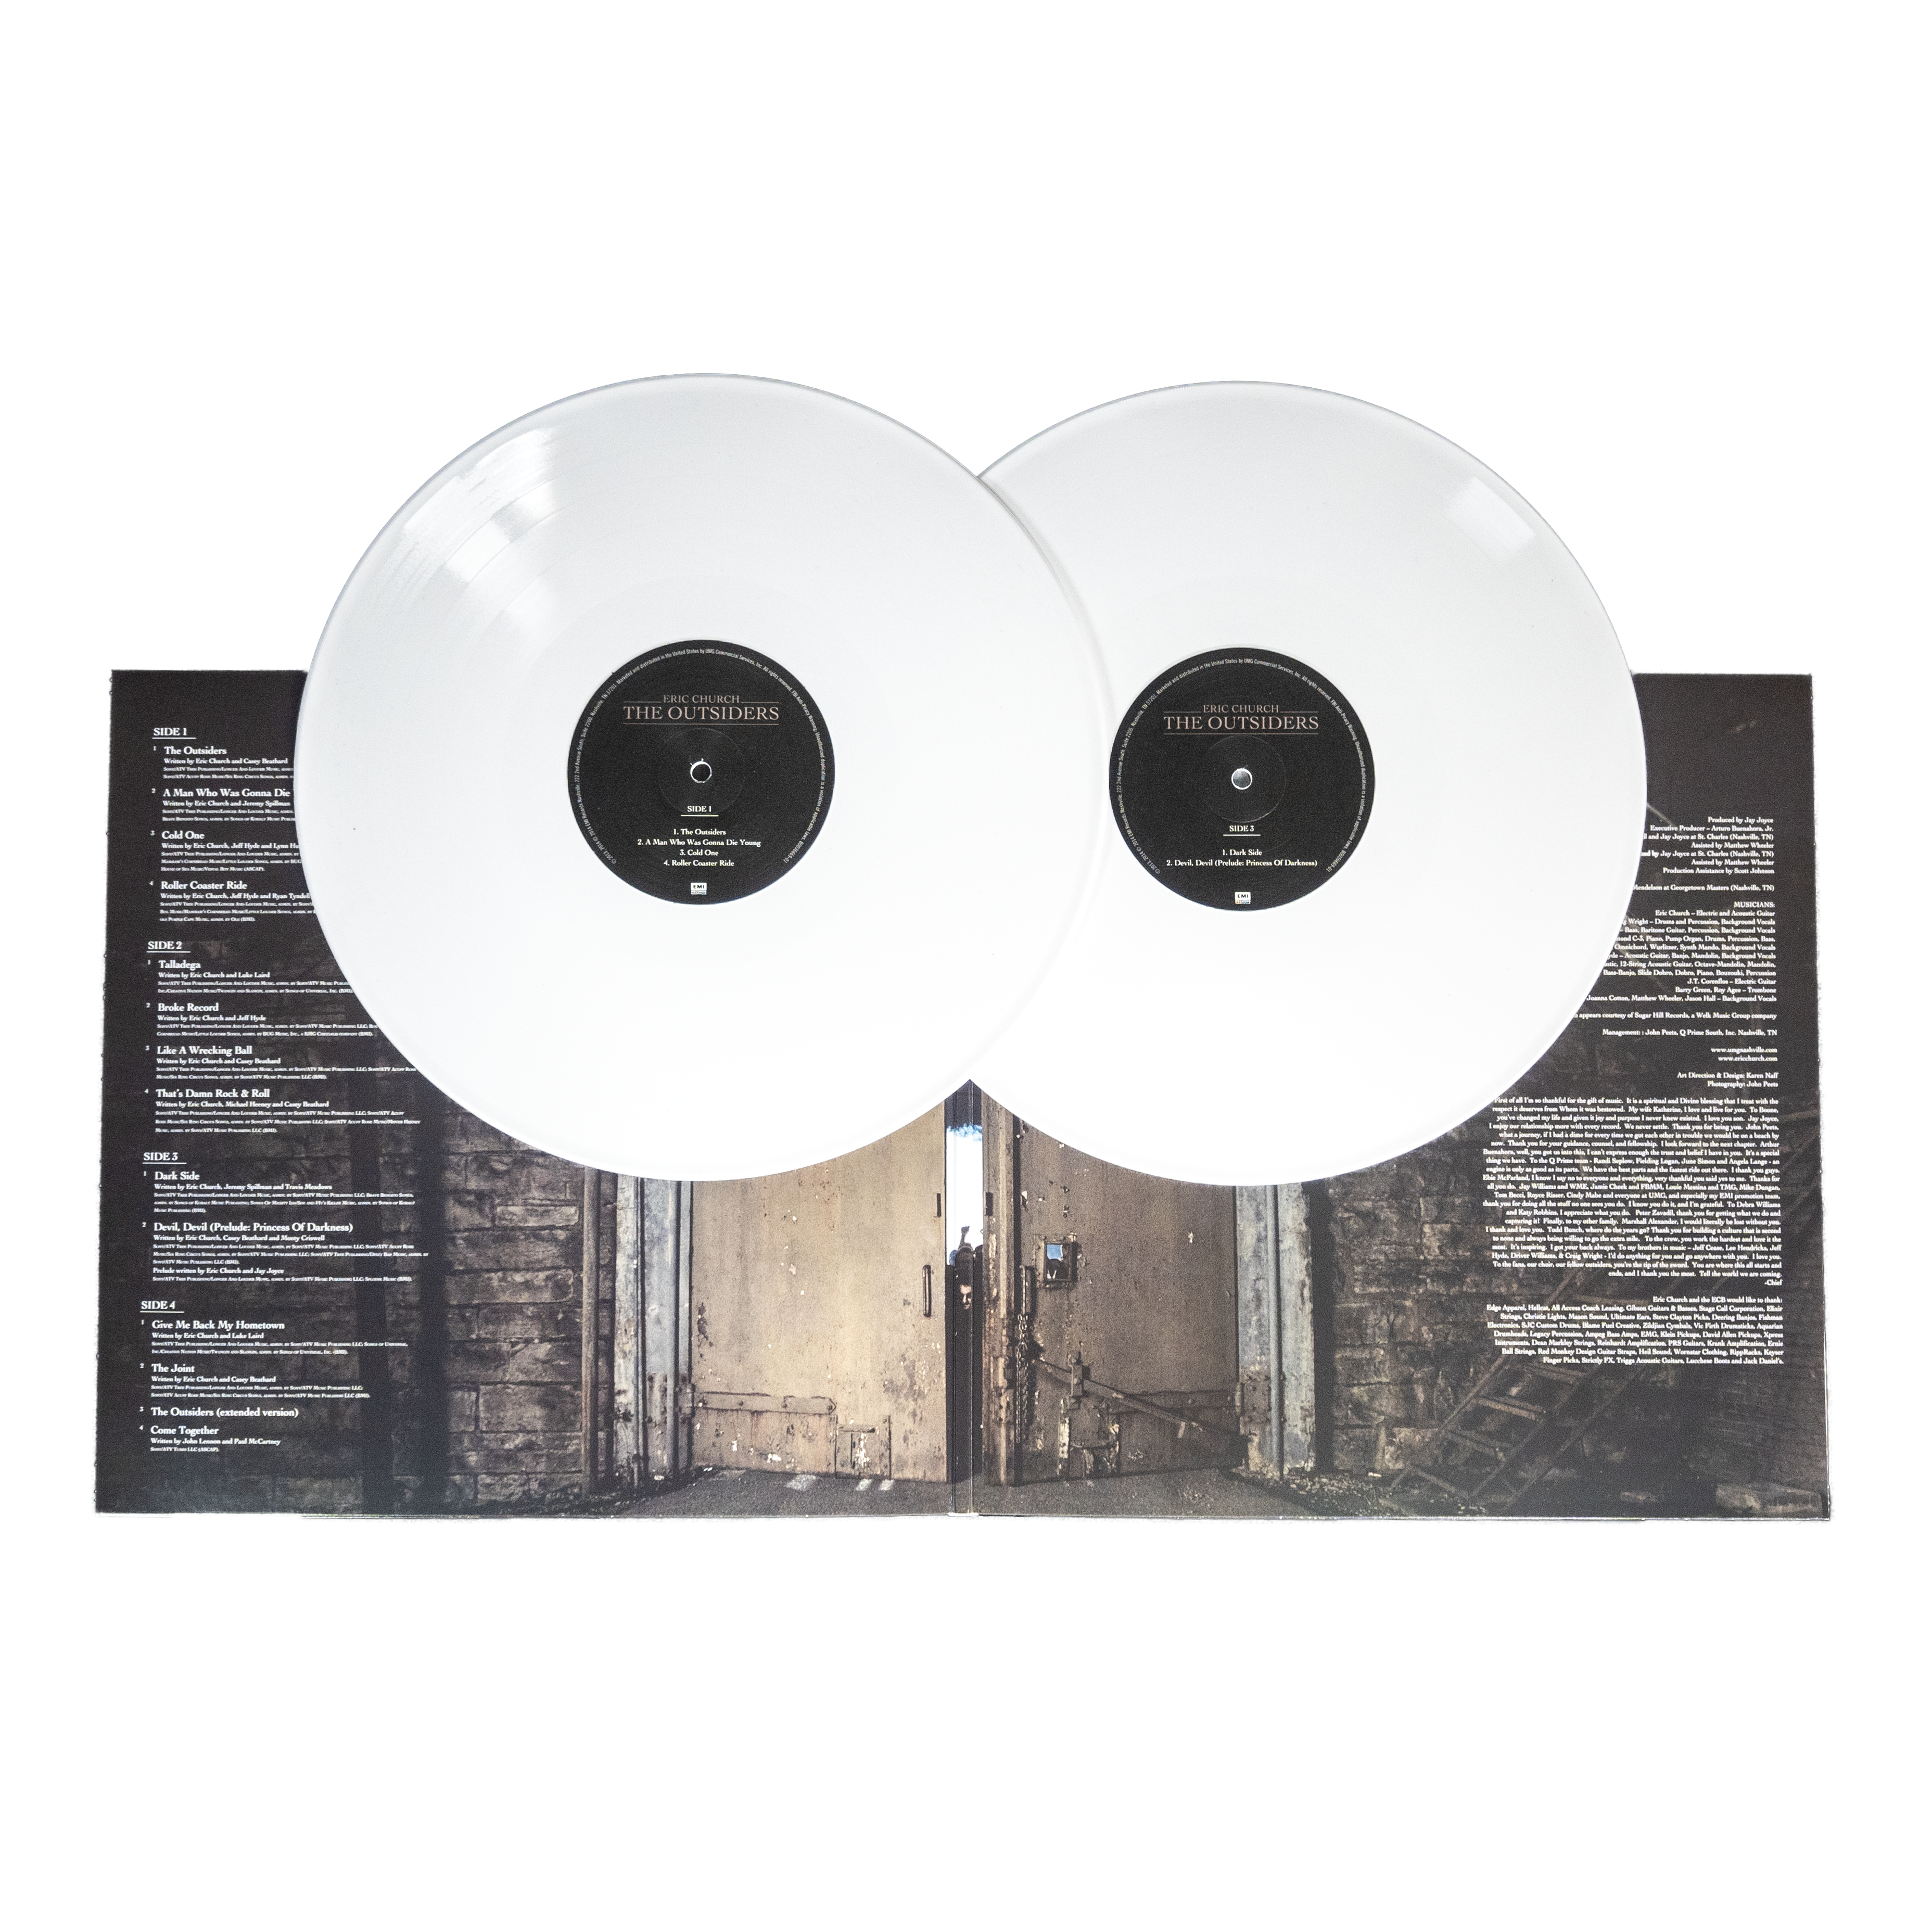 The Outsiders - 10 Year Anniversary Edition Vinyl